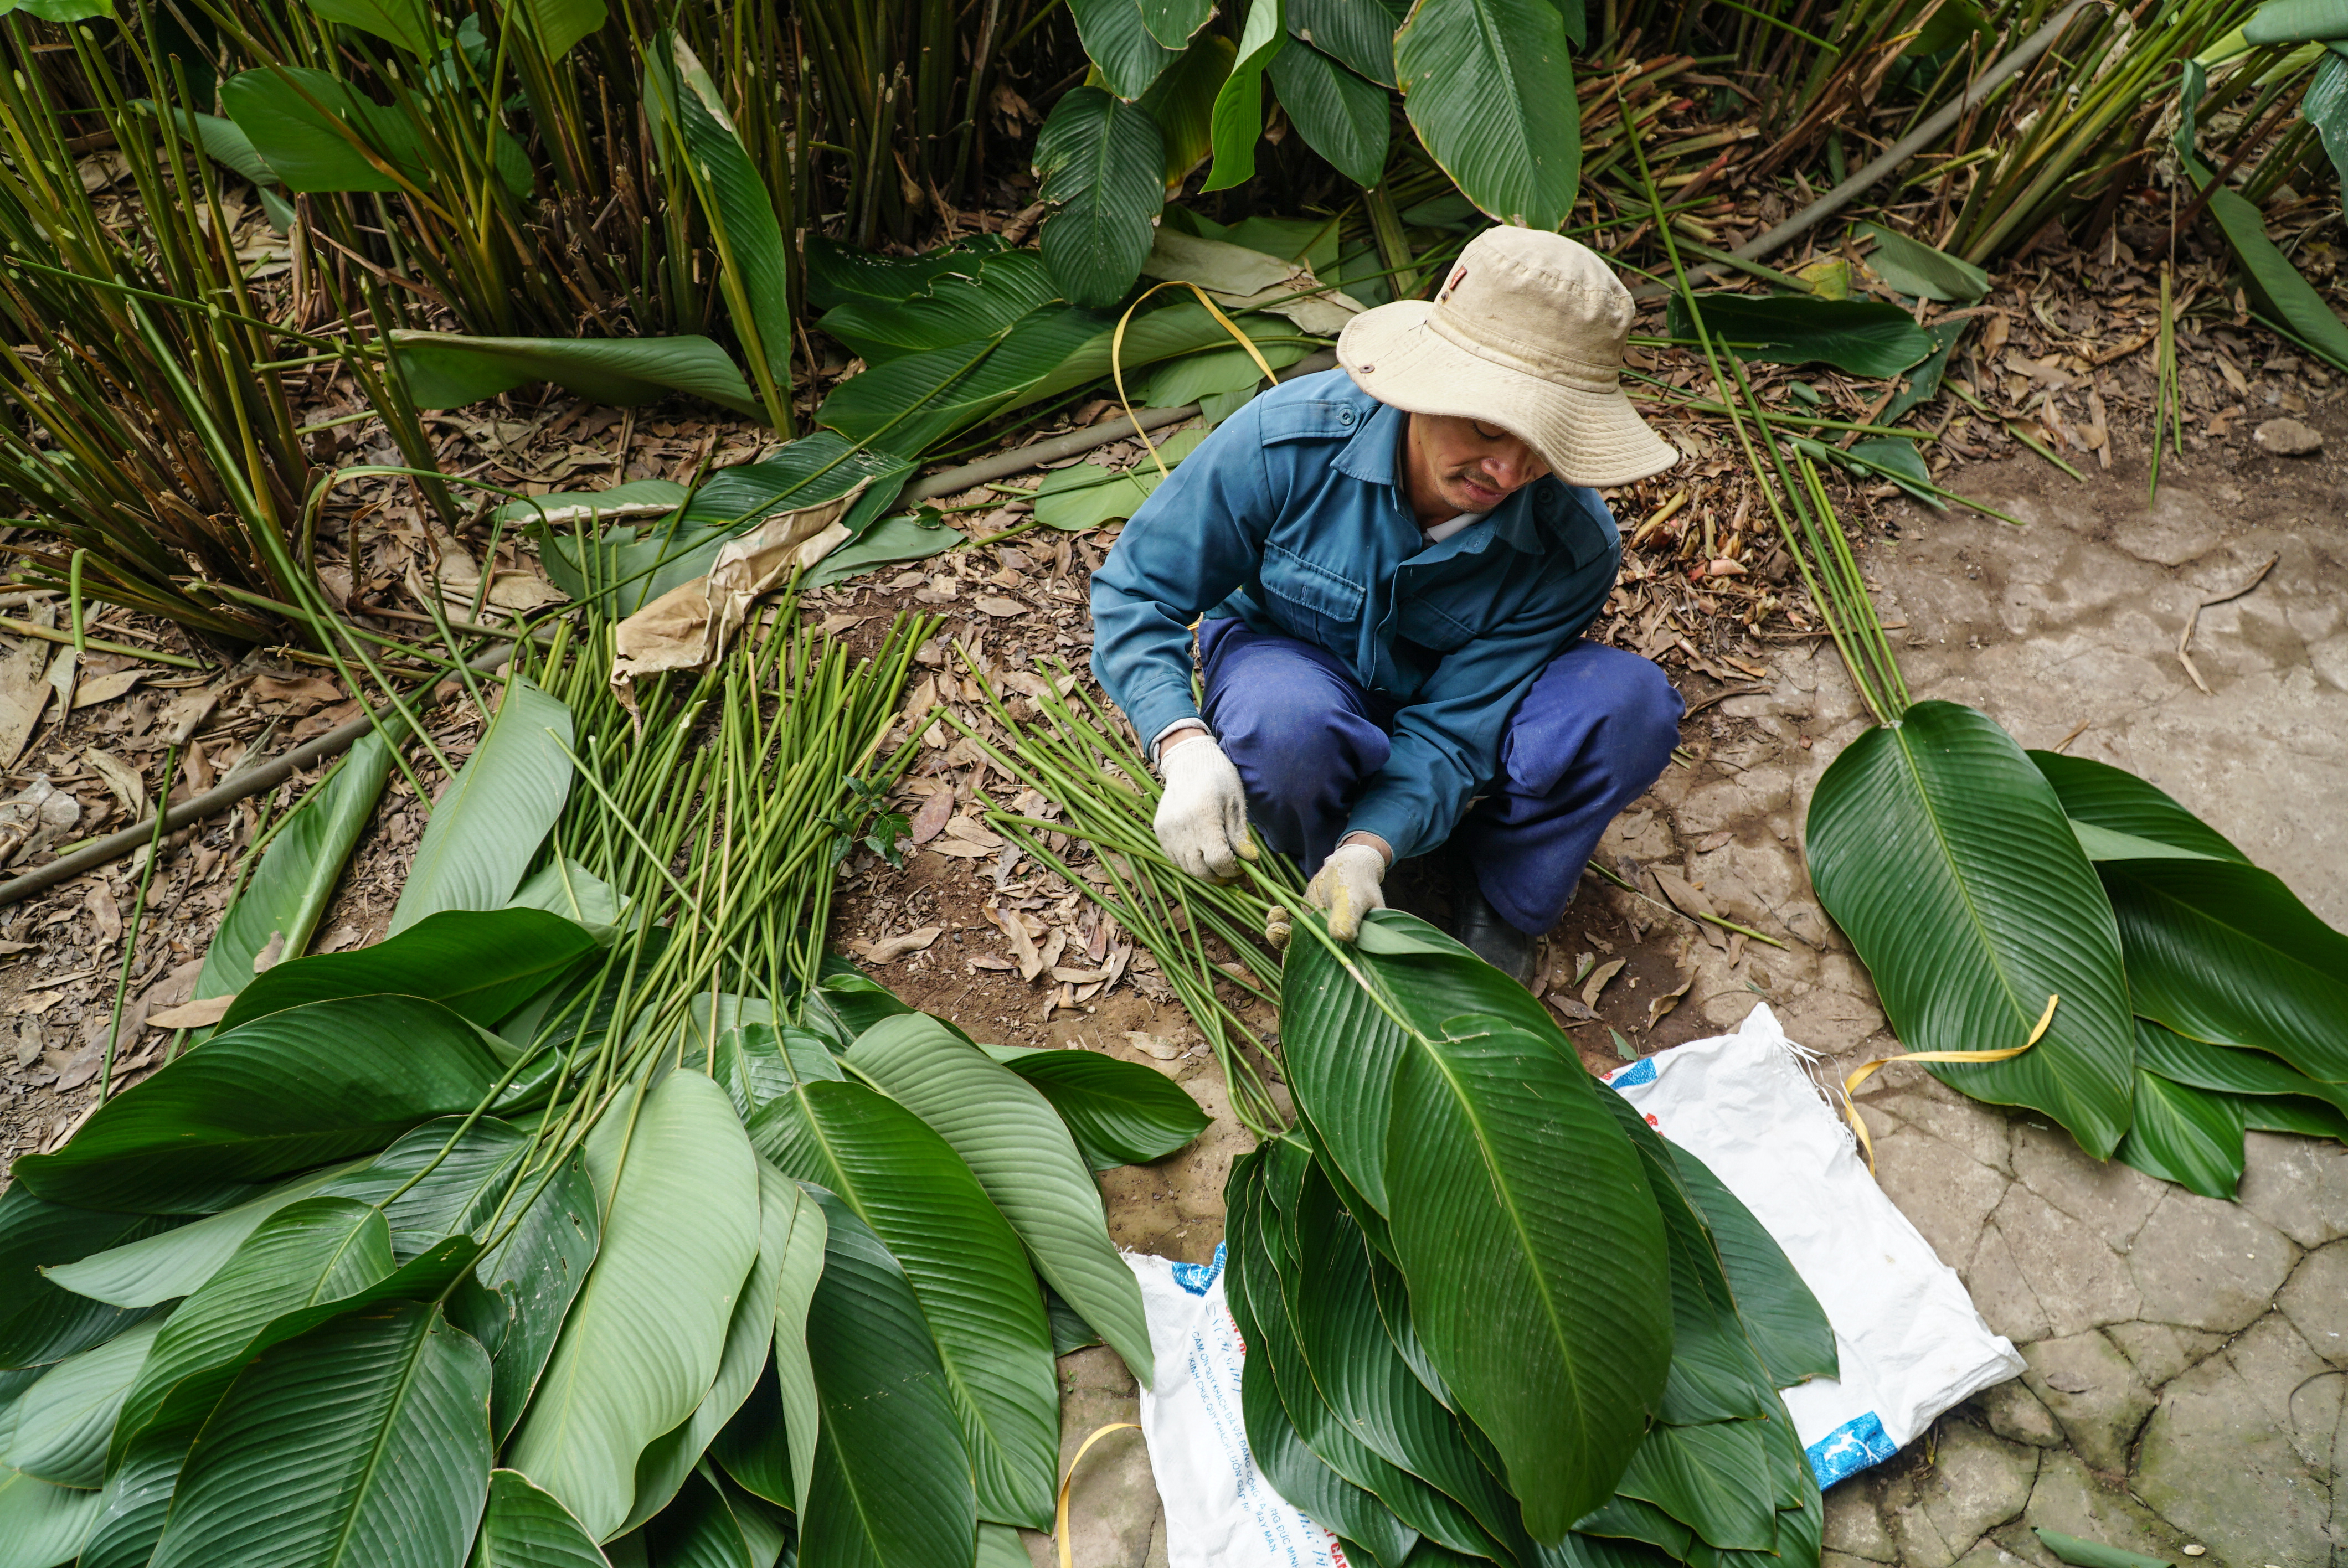 A farmer arranges ‘dong’ leaves by size in Trang Cat Village, Thanh Oai District, Hanoi. Photo: Nguyen Hien / Tuoi Tre